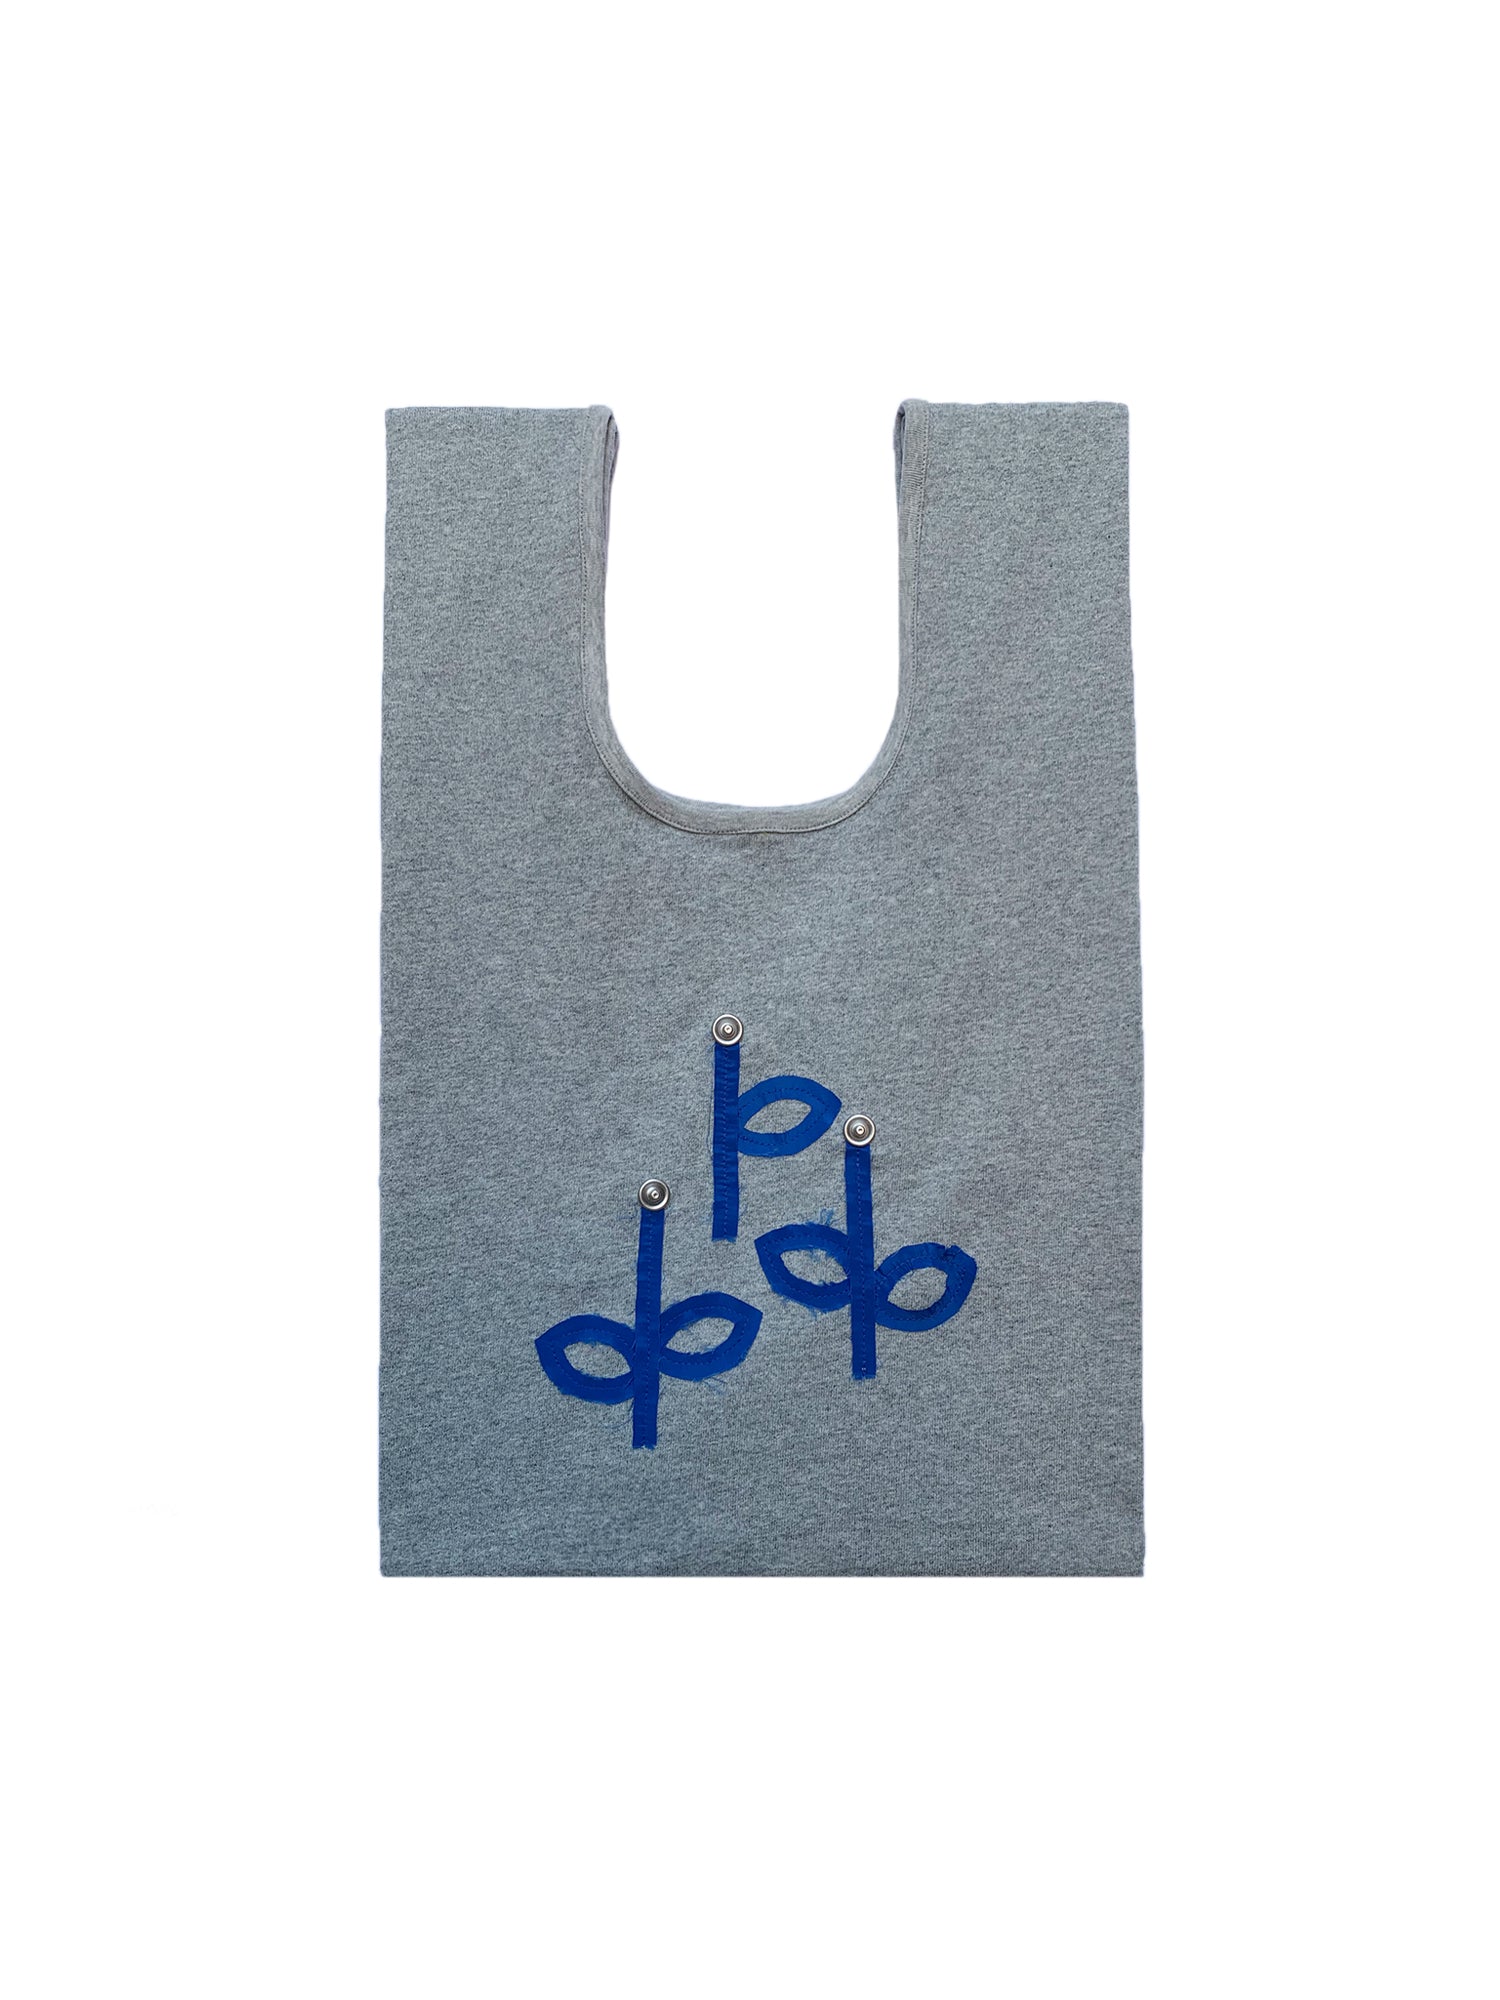 [ HAPPY MOTHER'S DAY ] LET'S GO SHOPPING BAG